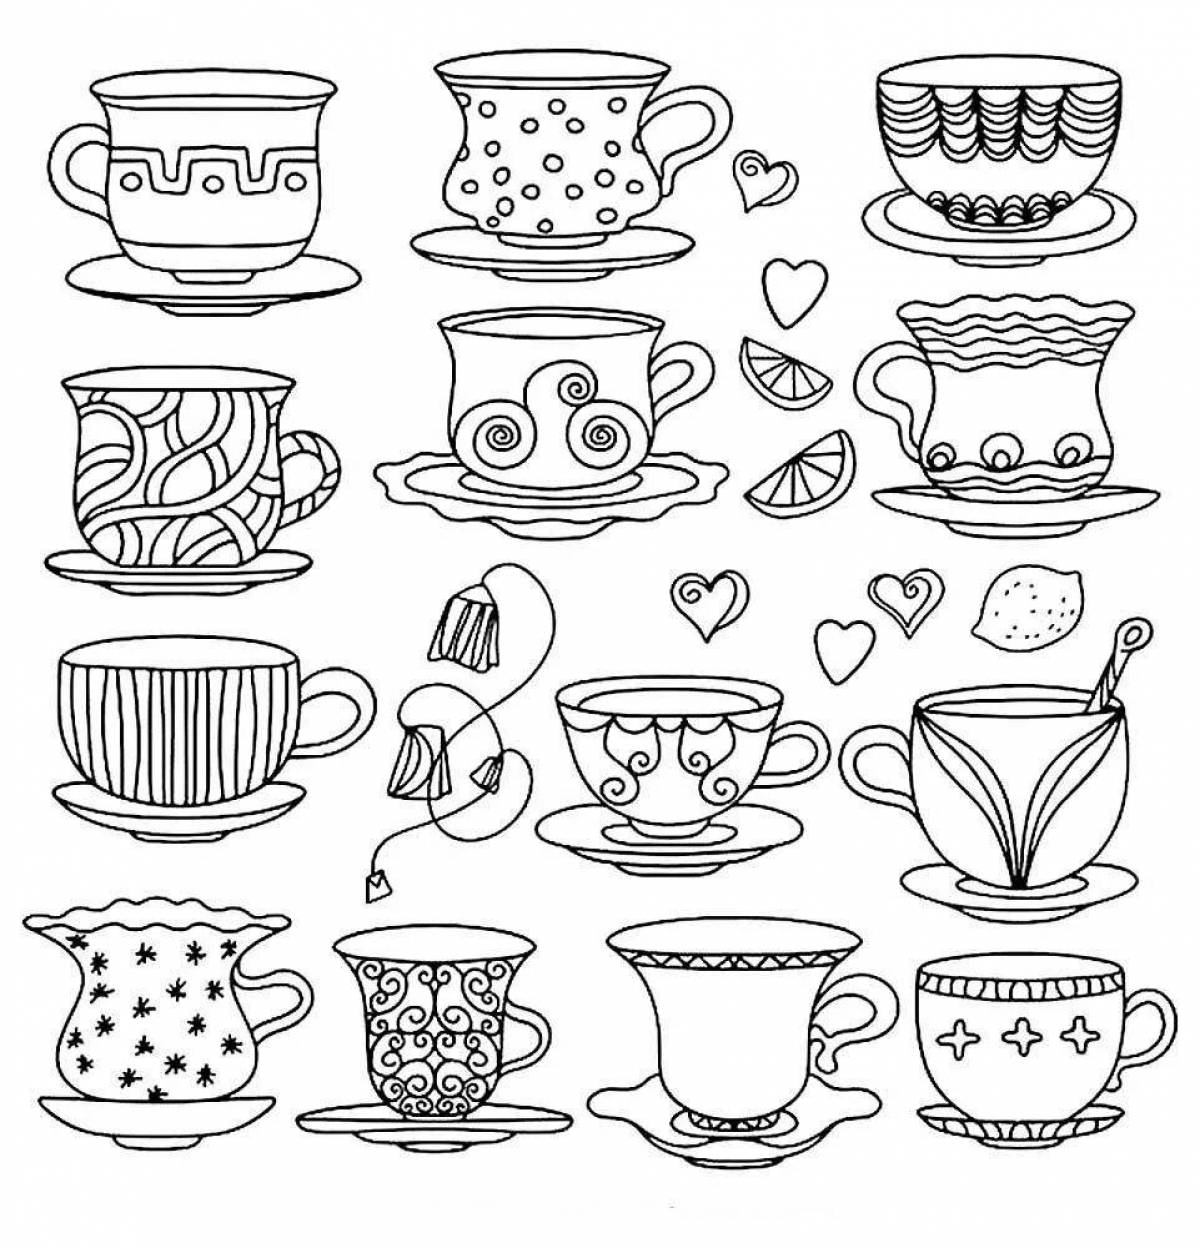 Charming service coloring page